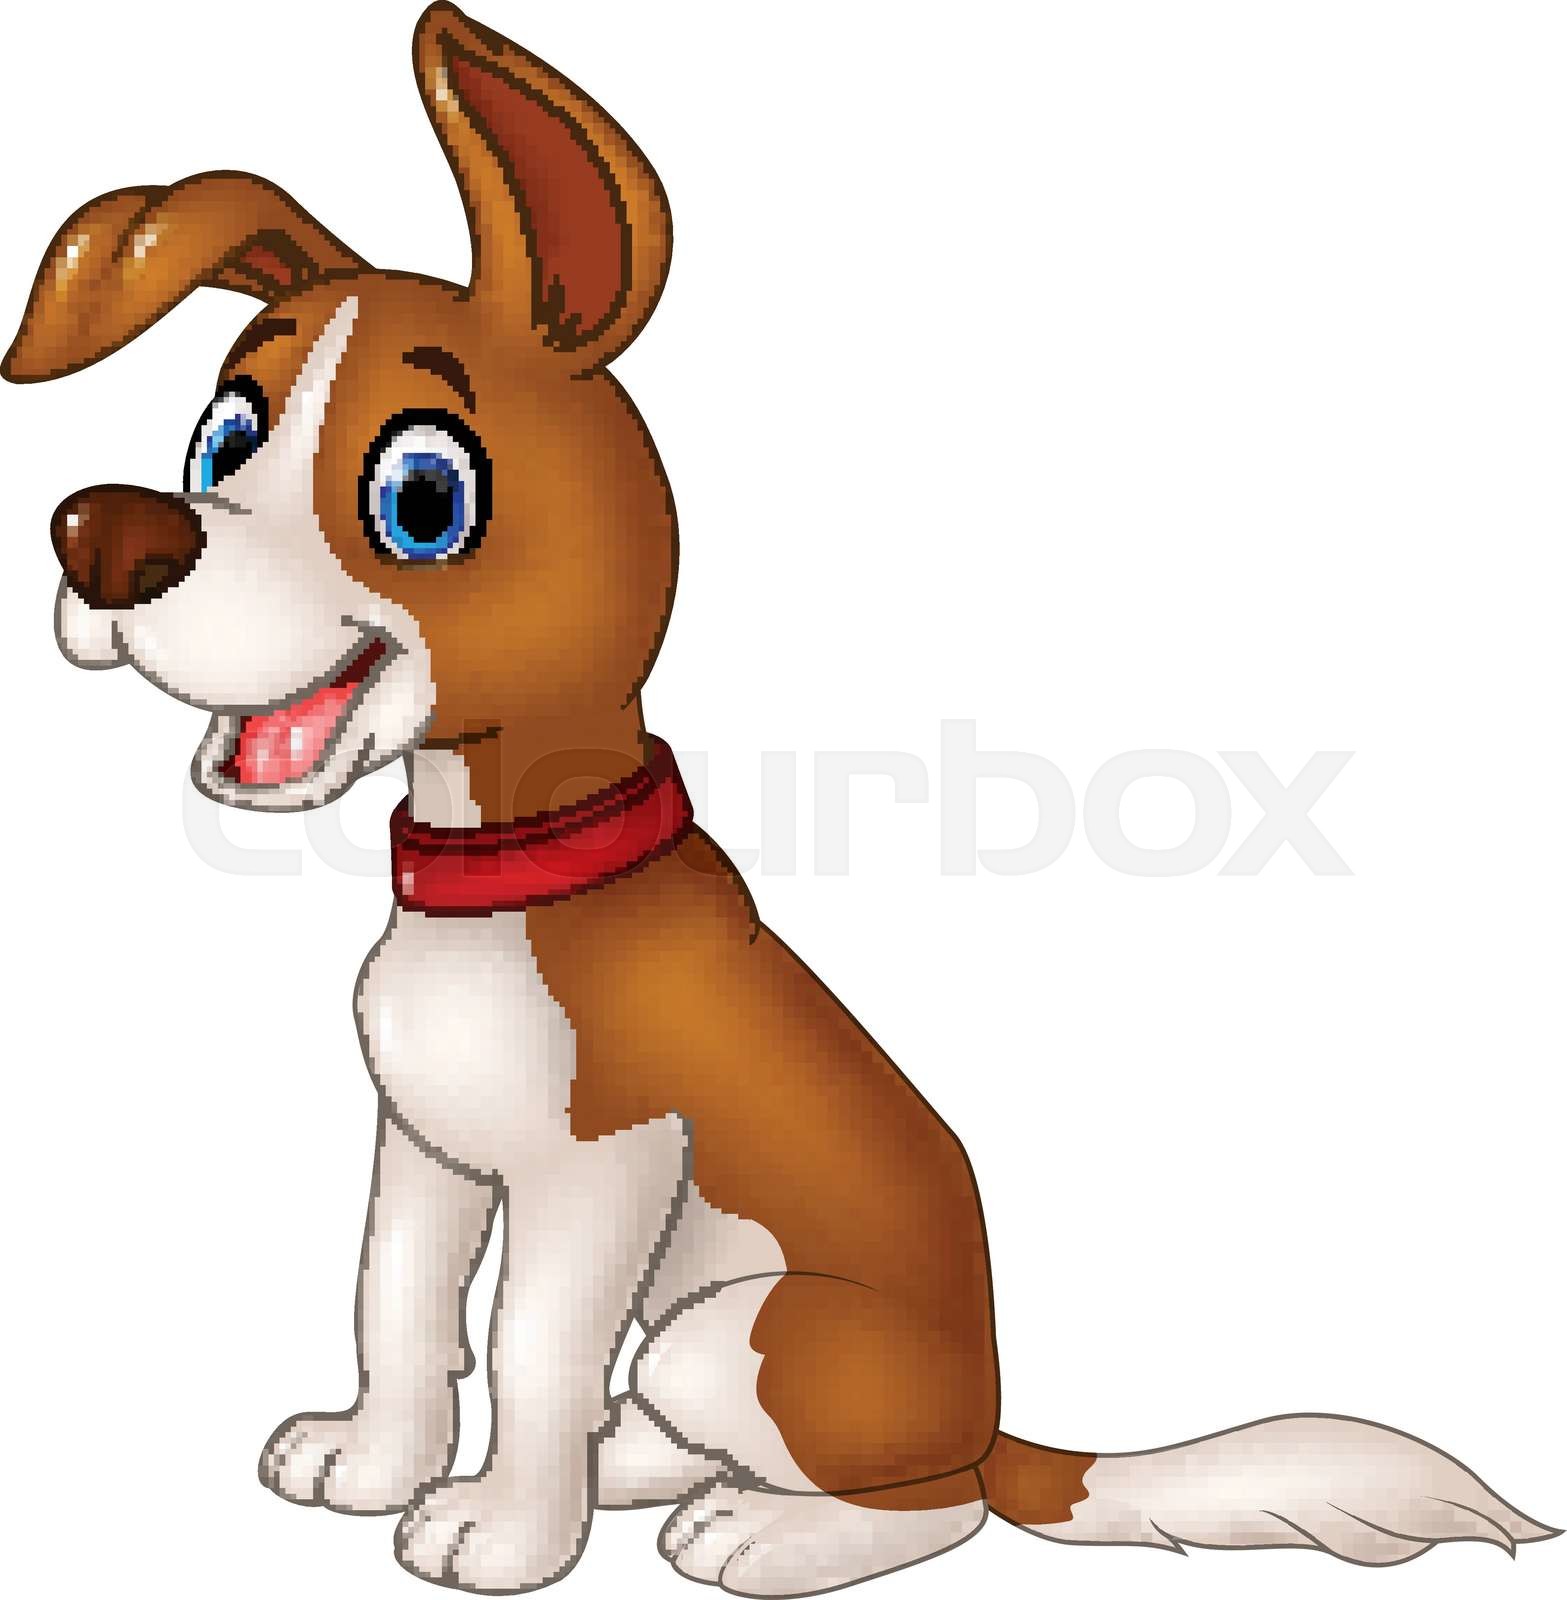 Sitting Dogs Backside Clipart Rear View Diifferent Coat Colors - Clip ...